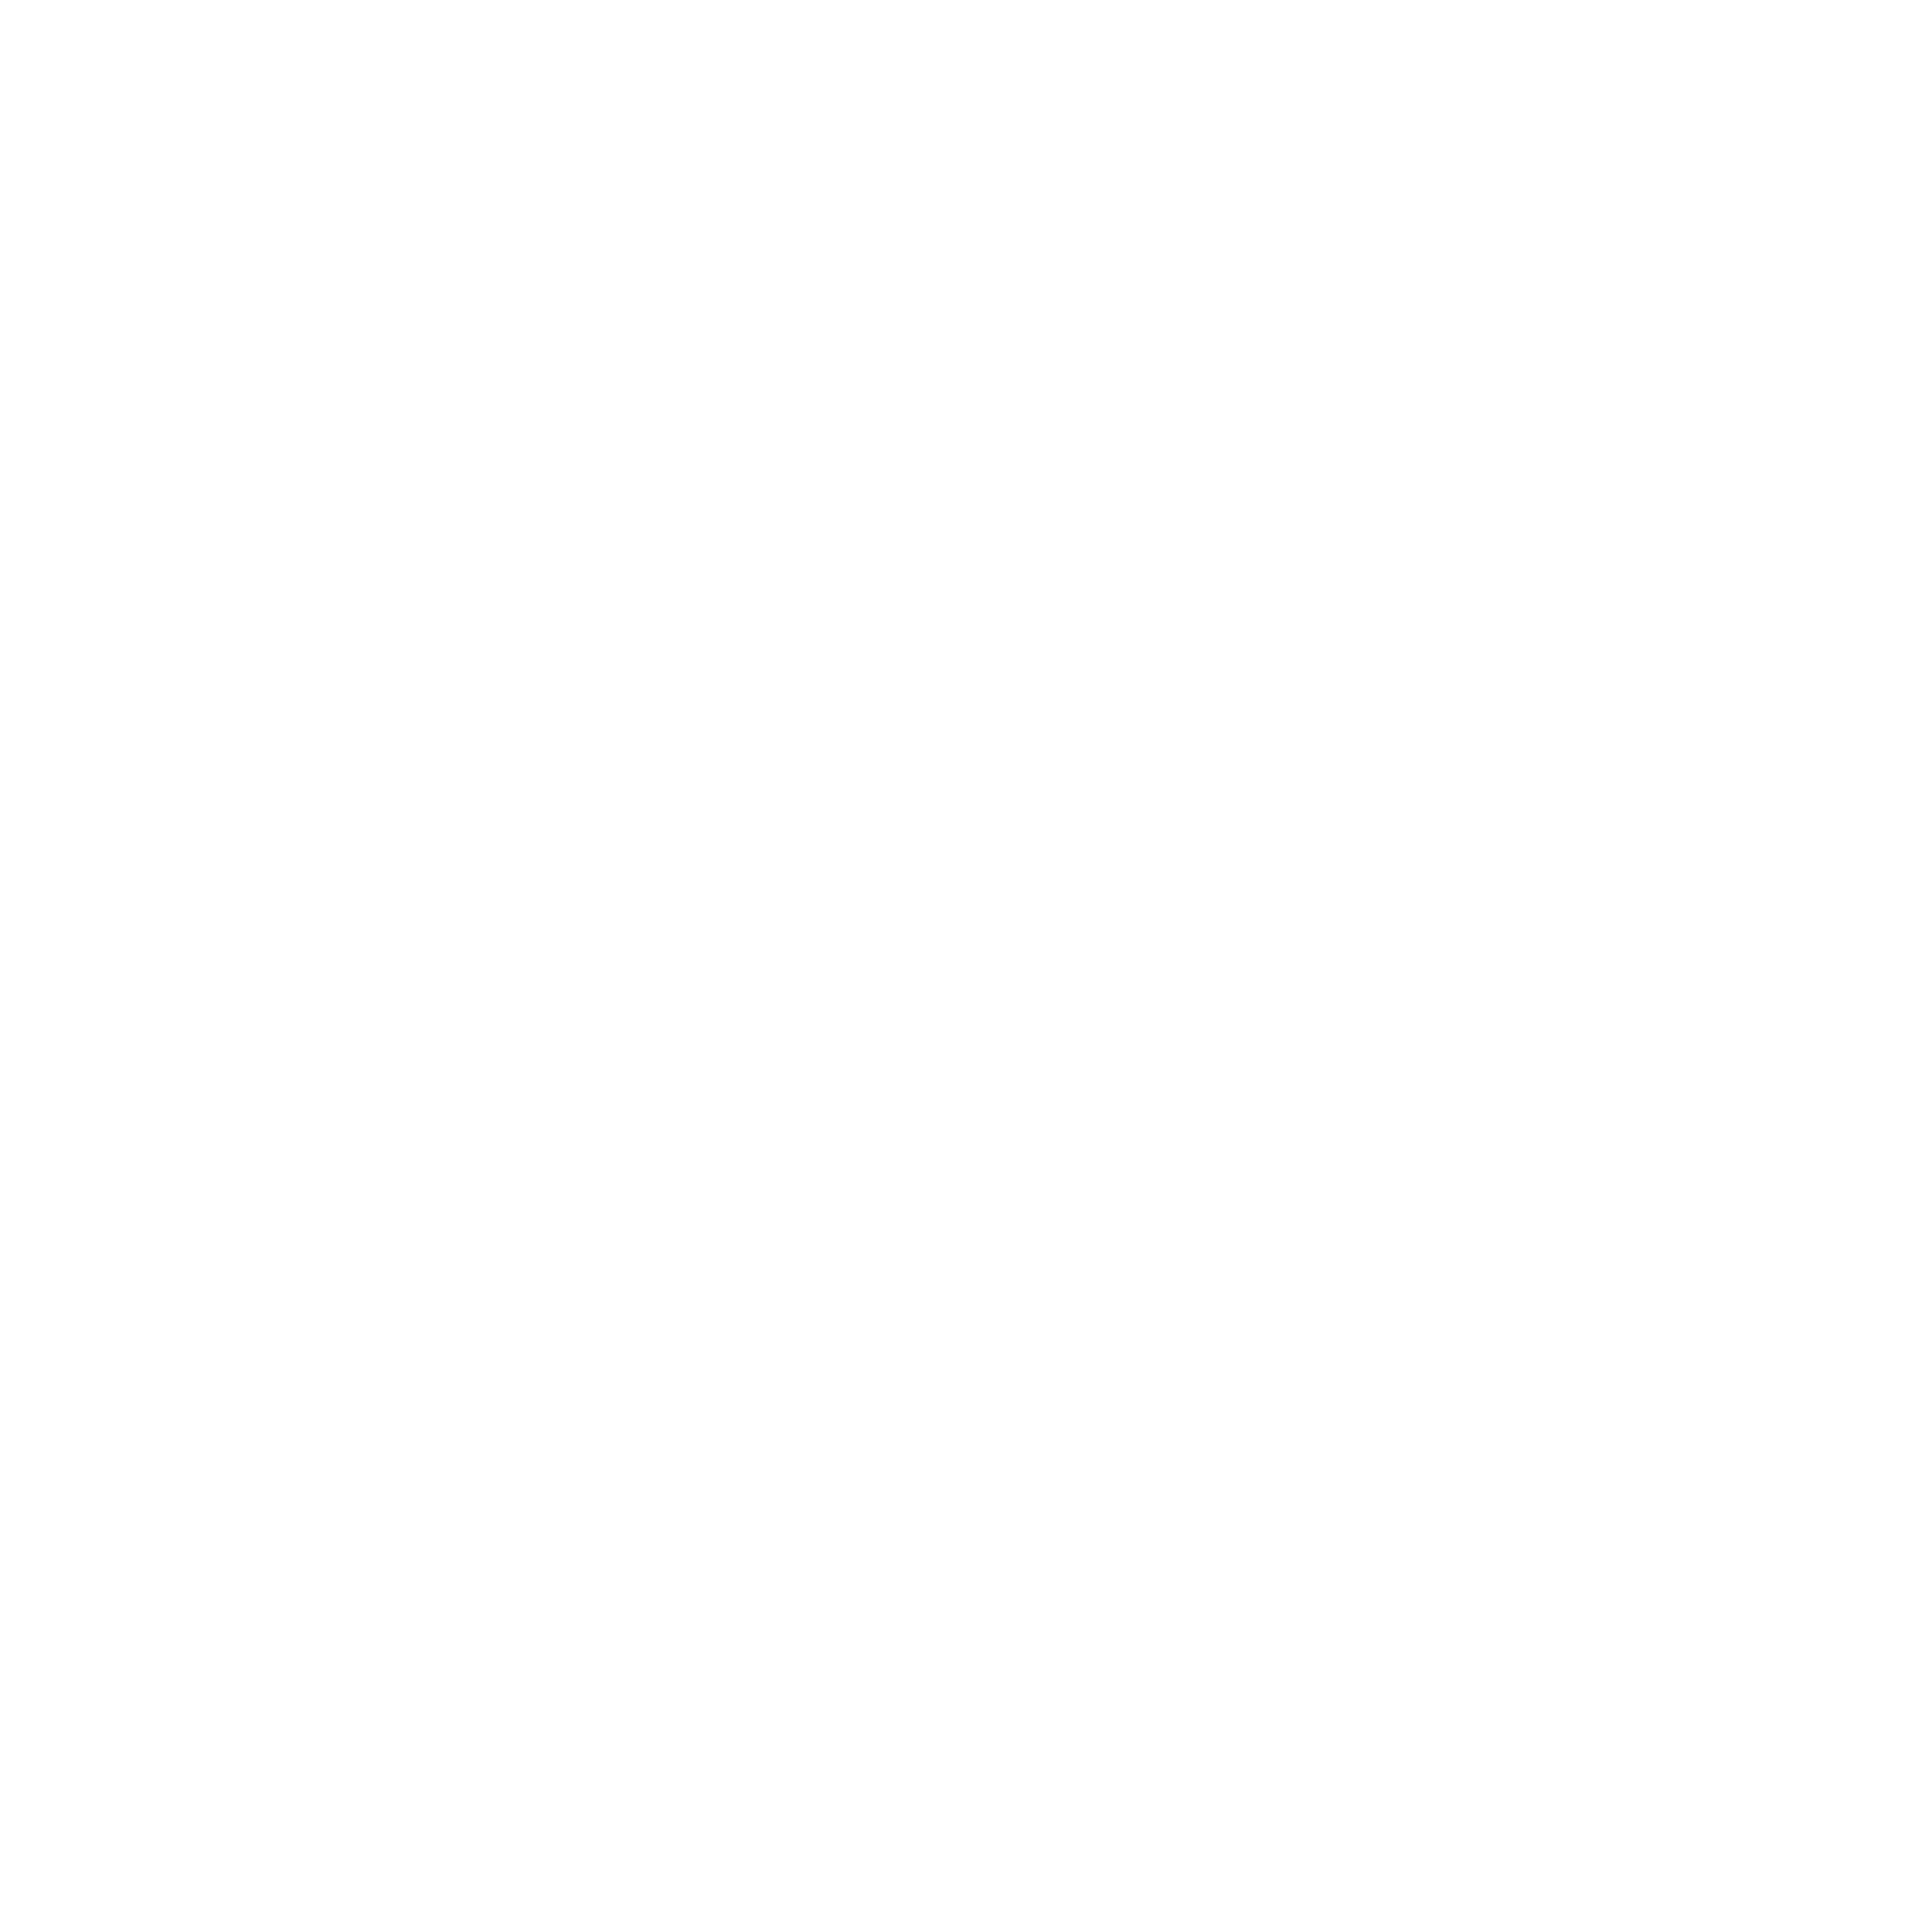 ClearWealth